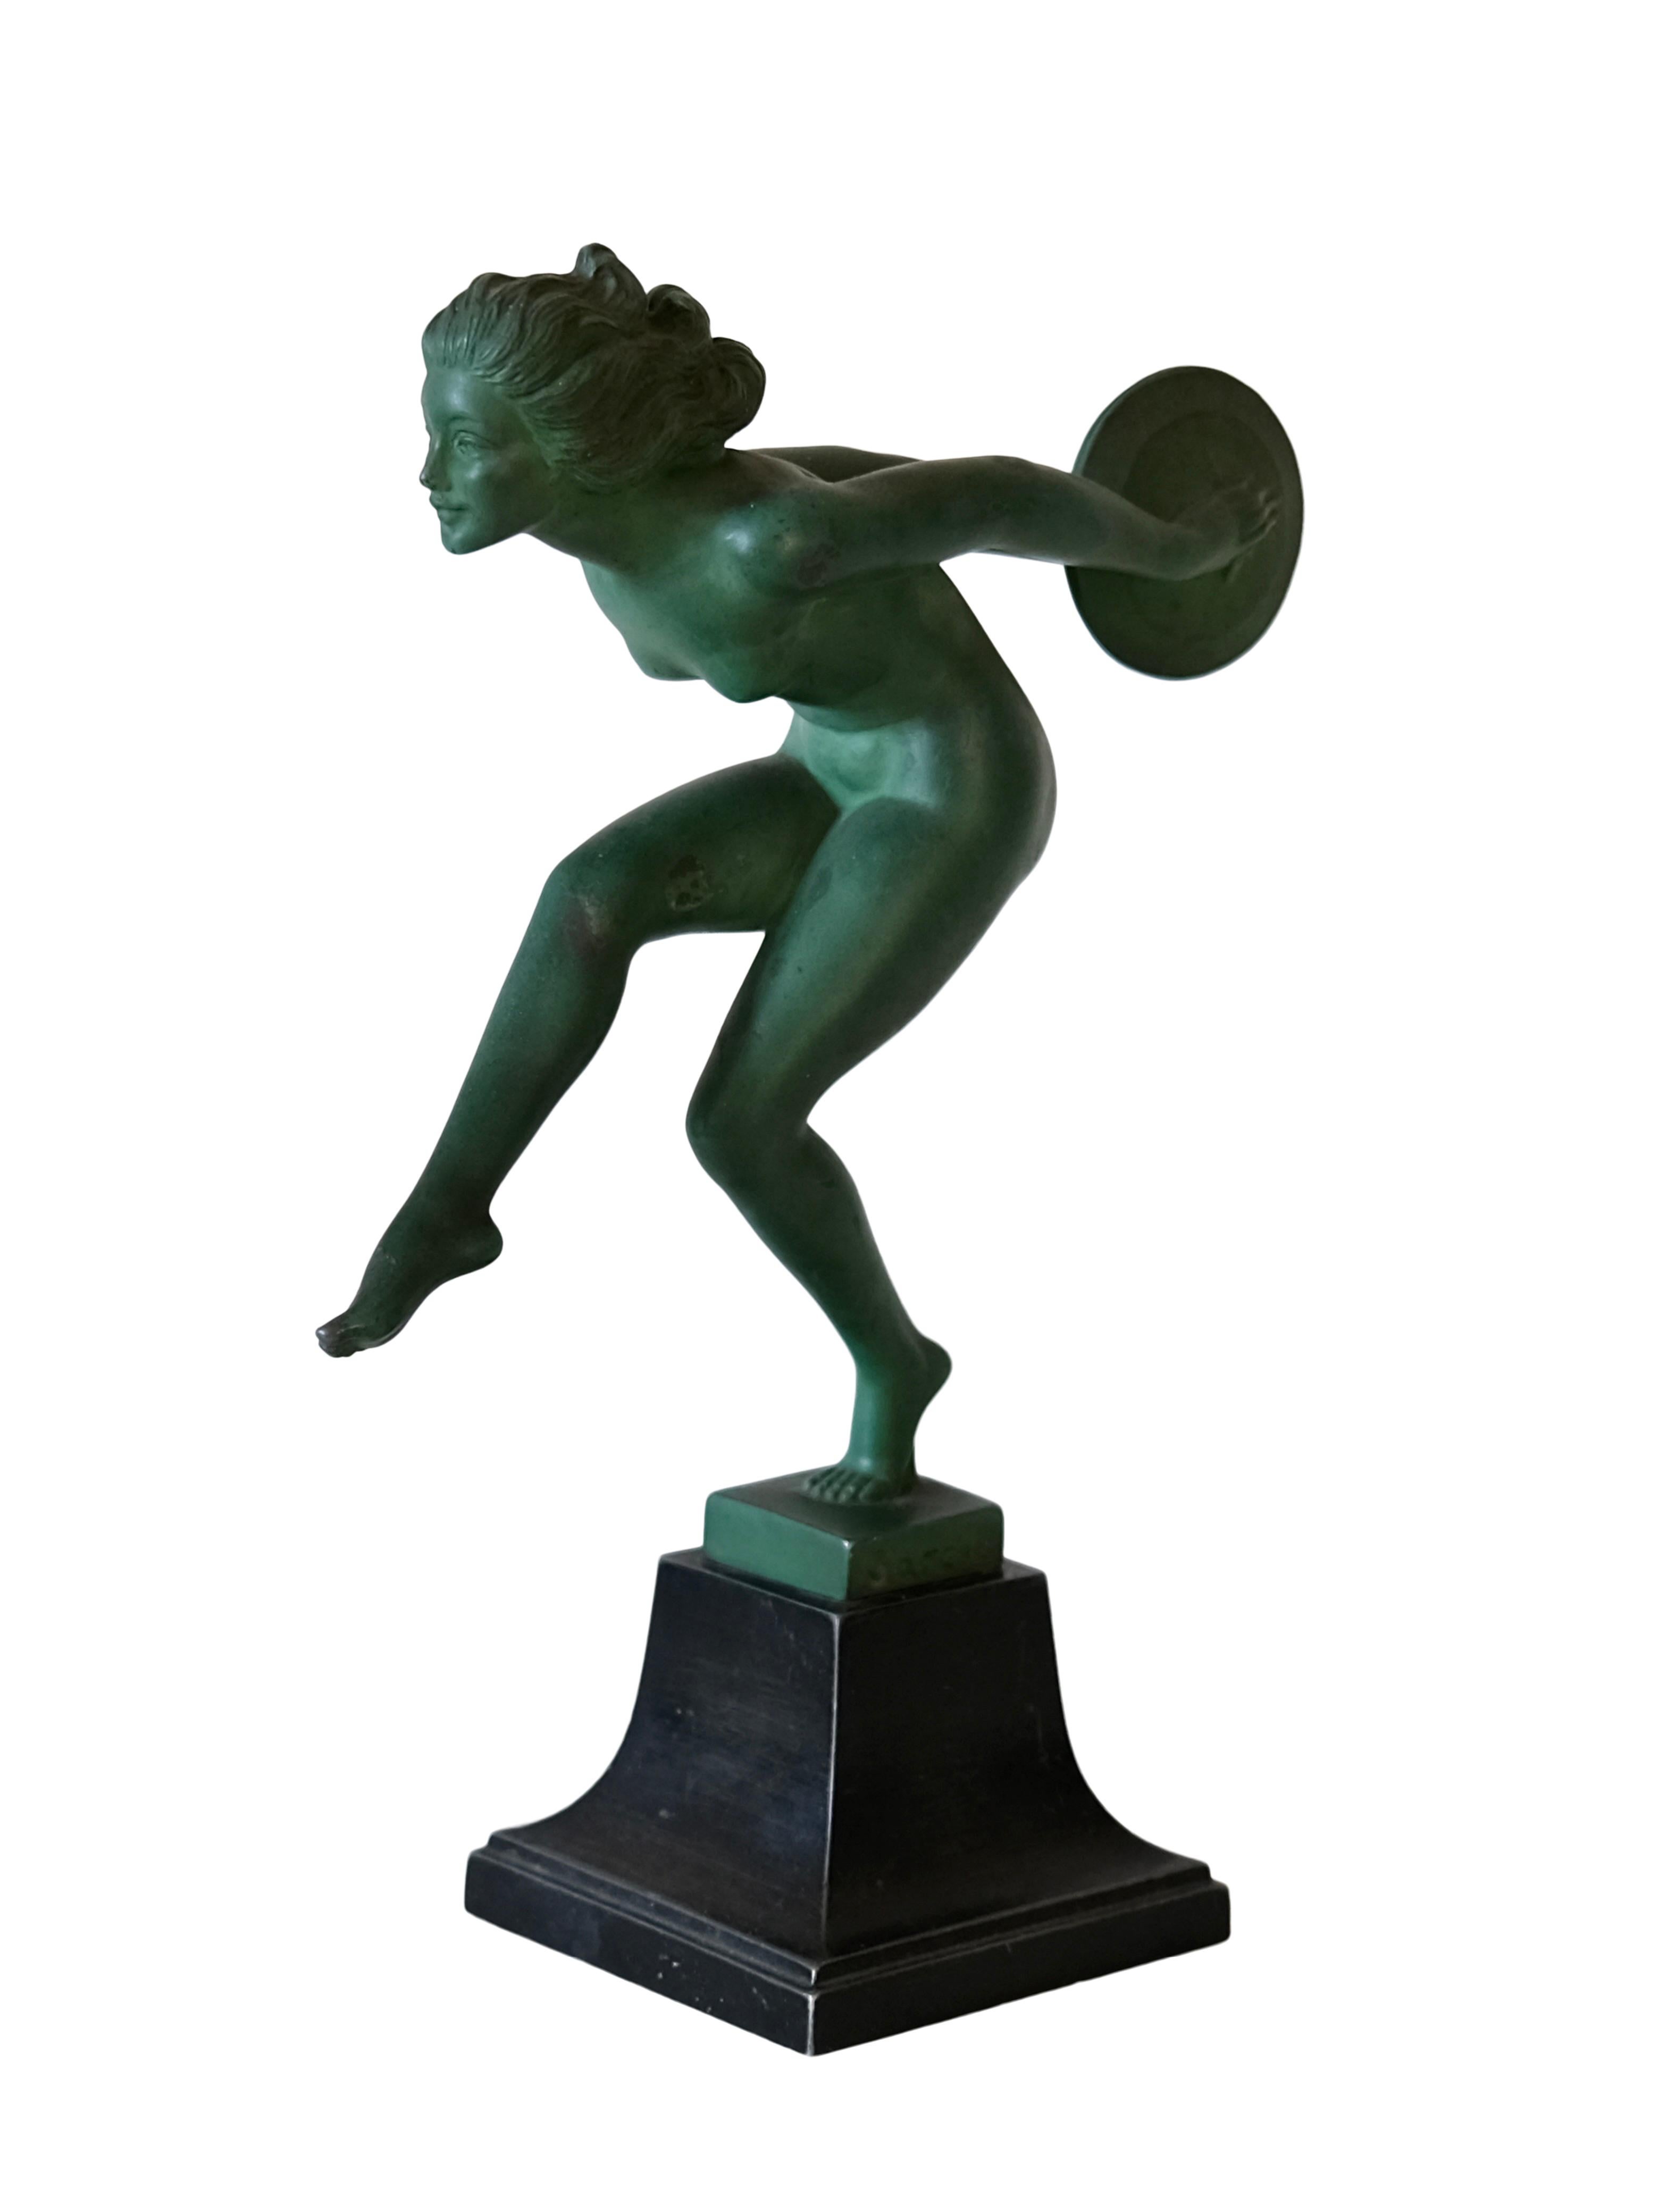 Joie (the joy)
dynamic sculpture of a dancer 

Design and creation by 